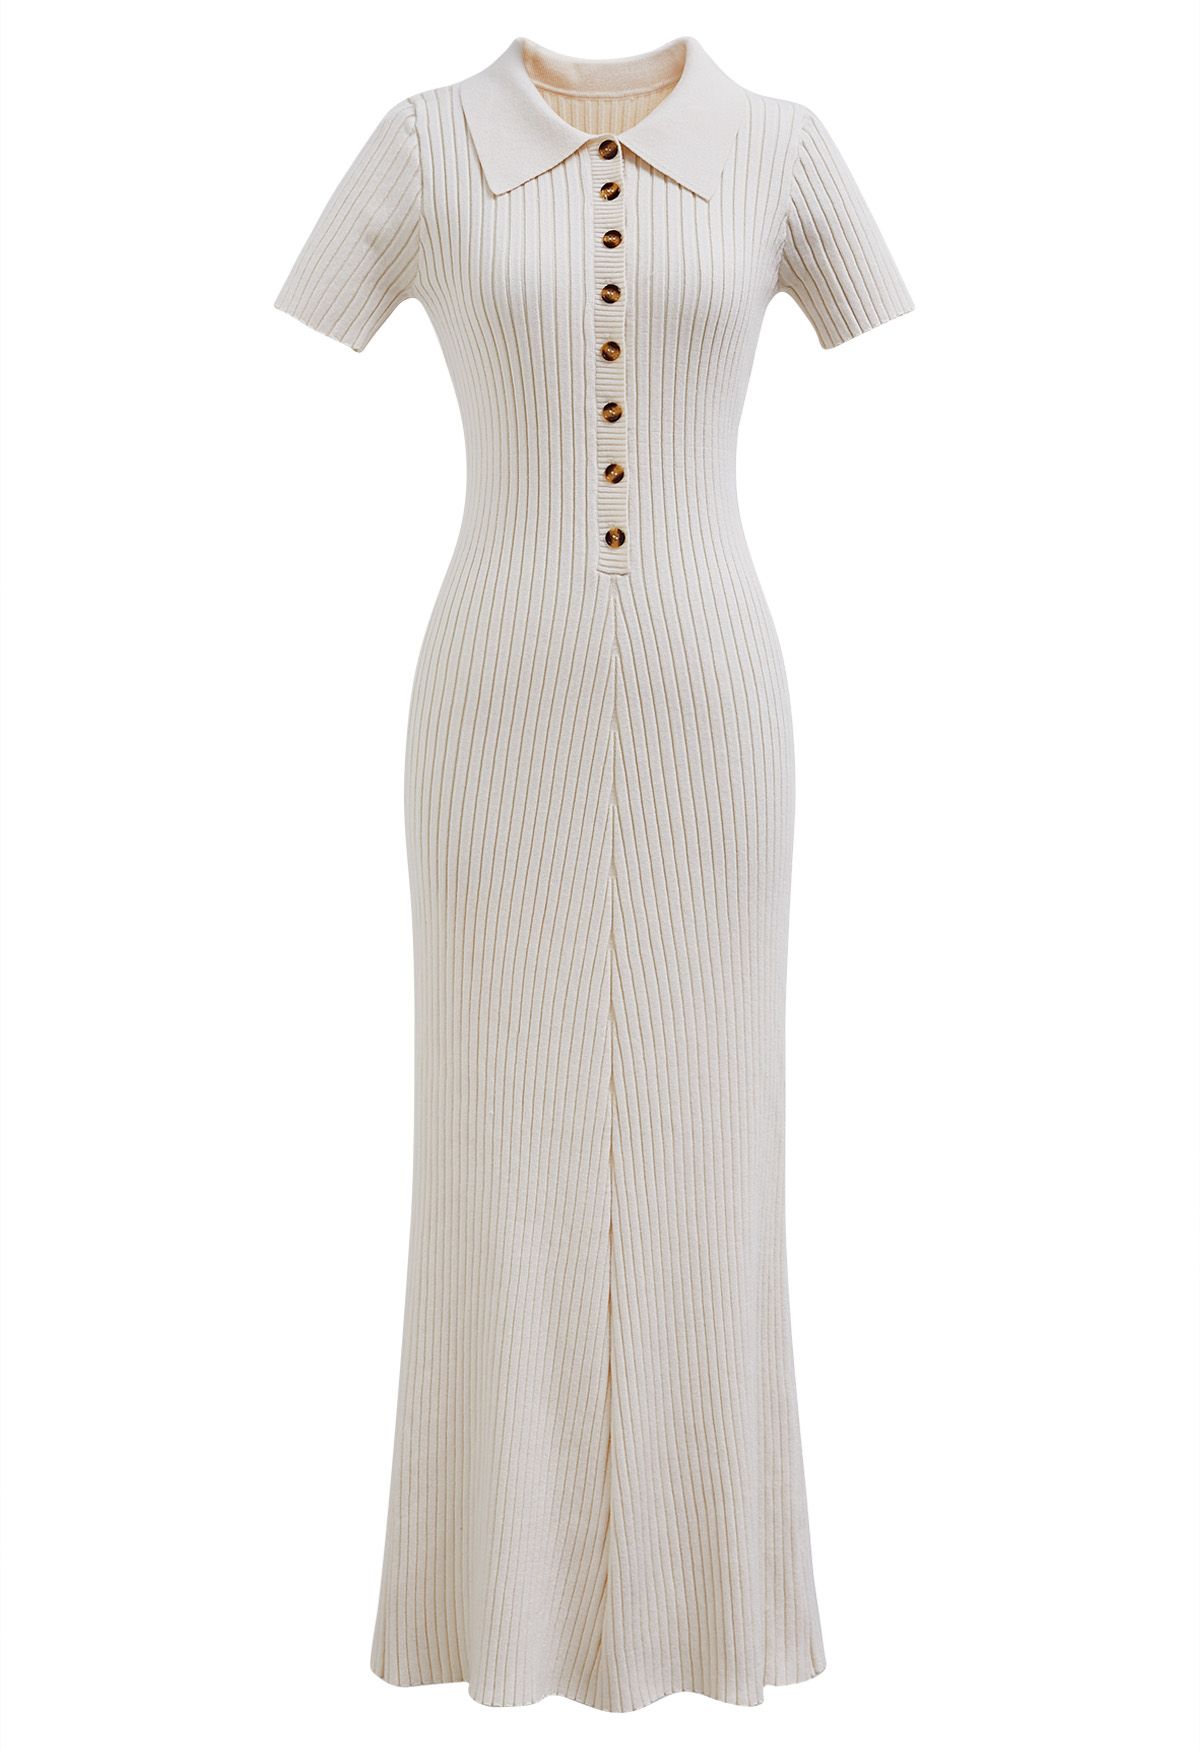 Collared Buttoned Short Sleeve Bodycon Knit Dress in Cream